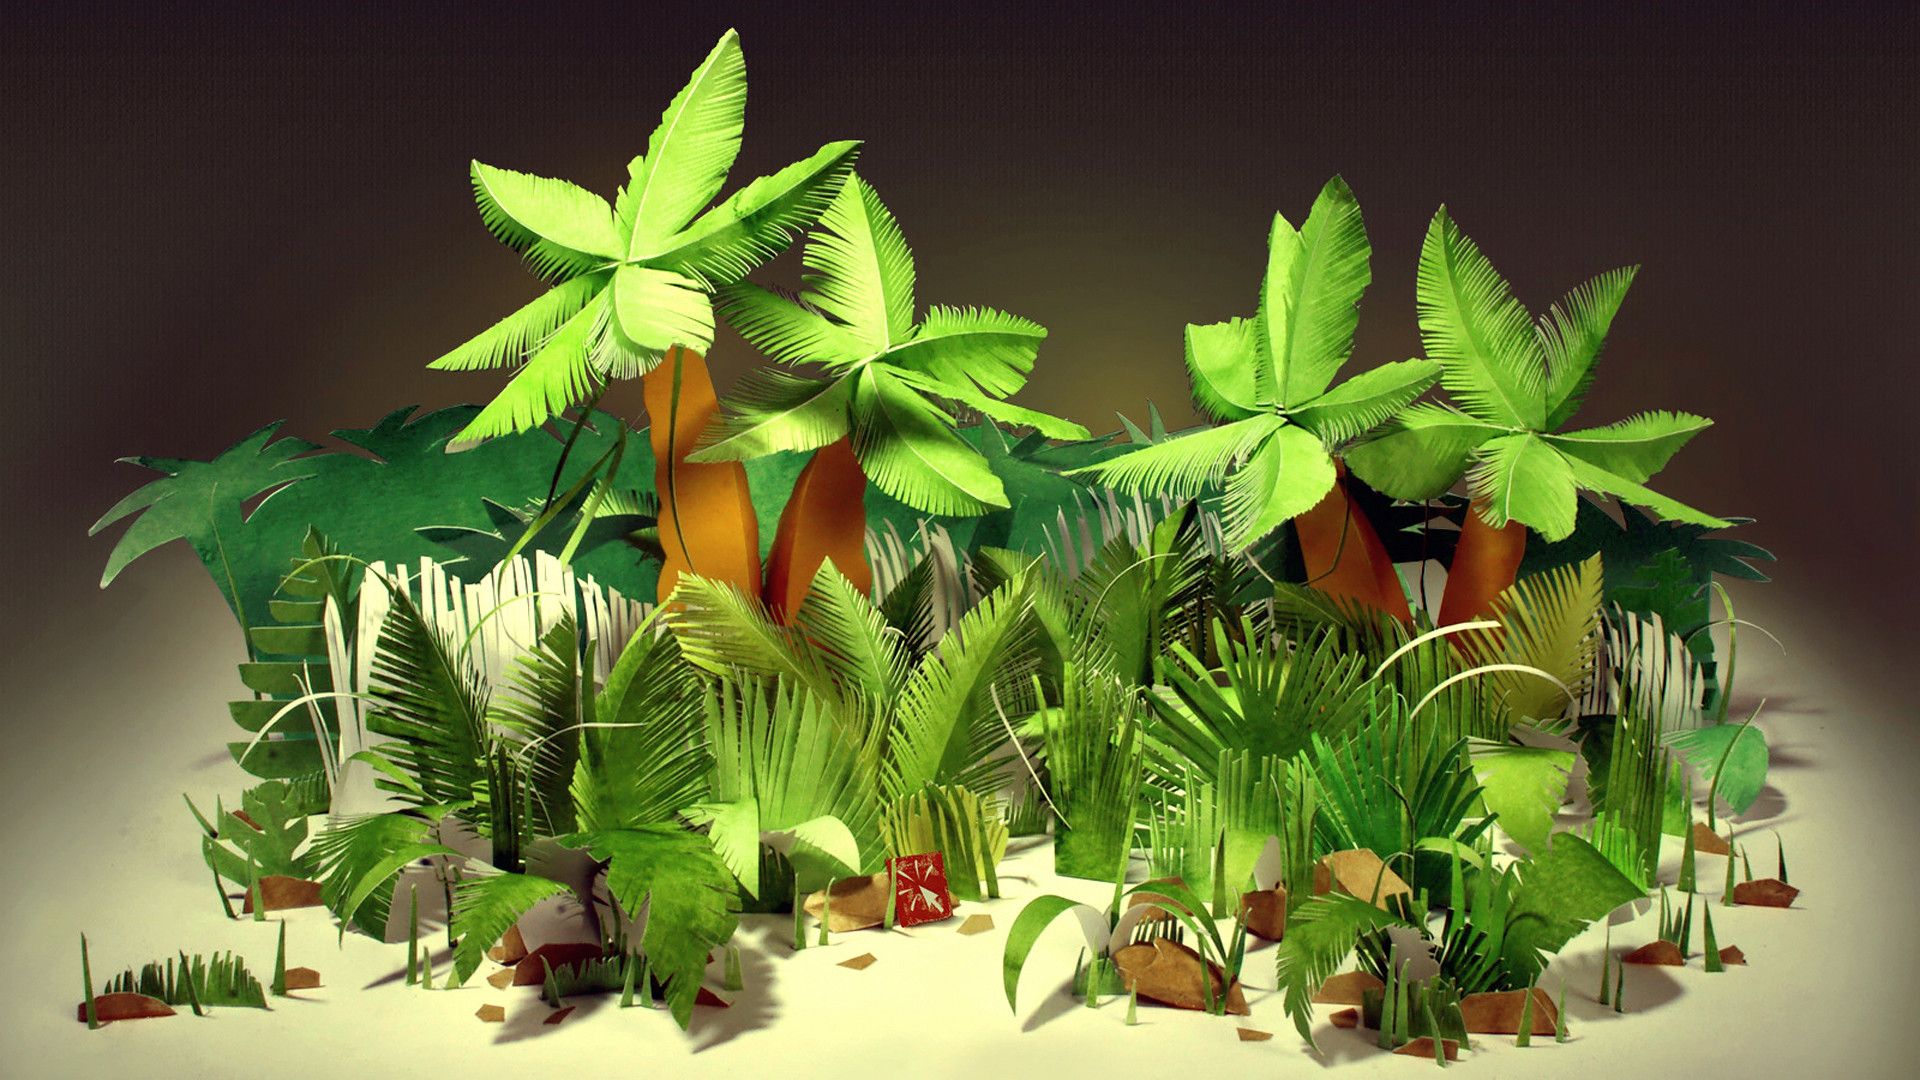 A paper model of a palm forest with a mix of palm species - Tropical